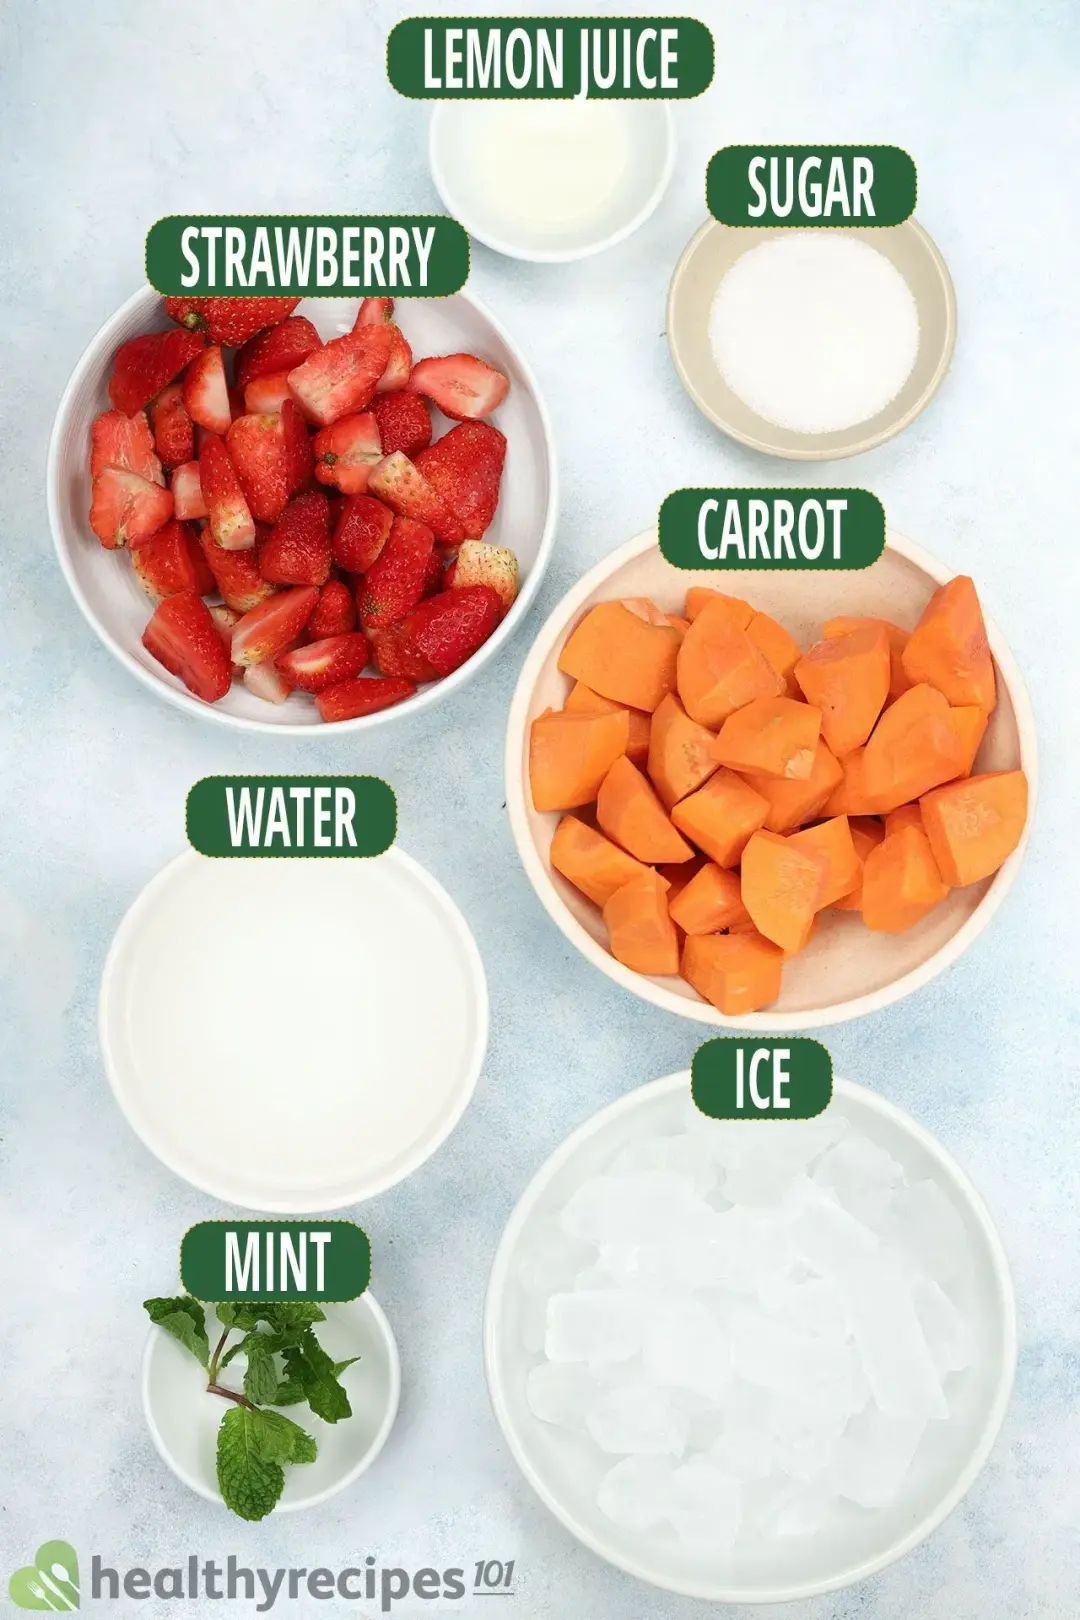 Ingredients for Strawberry Carrot Juice